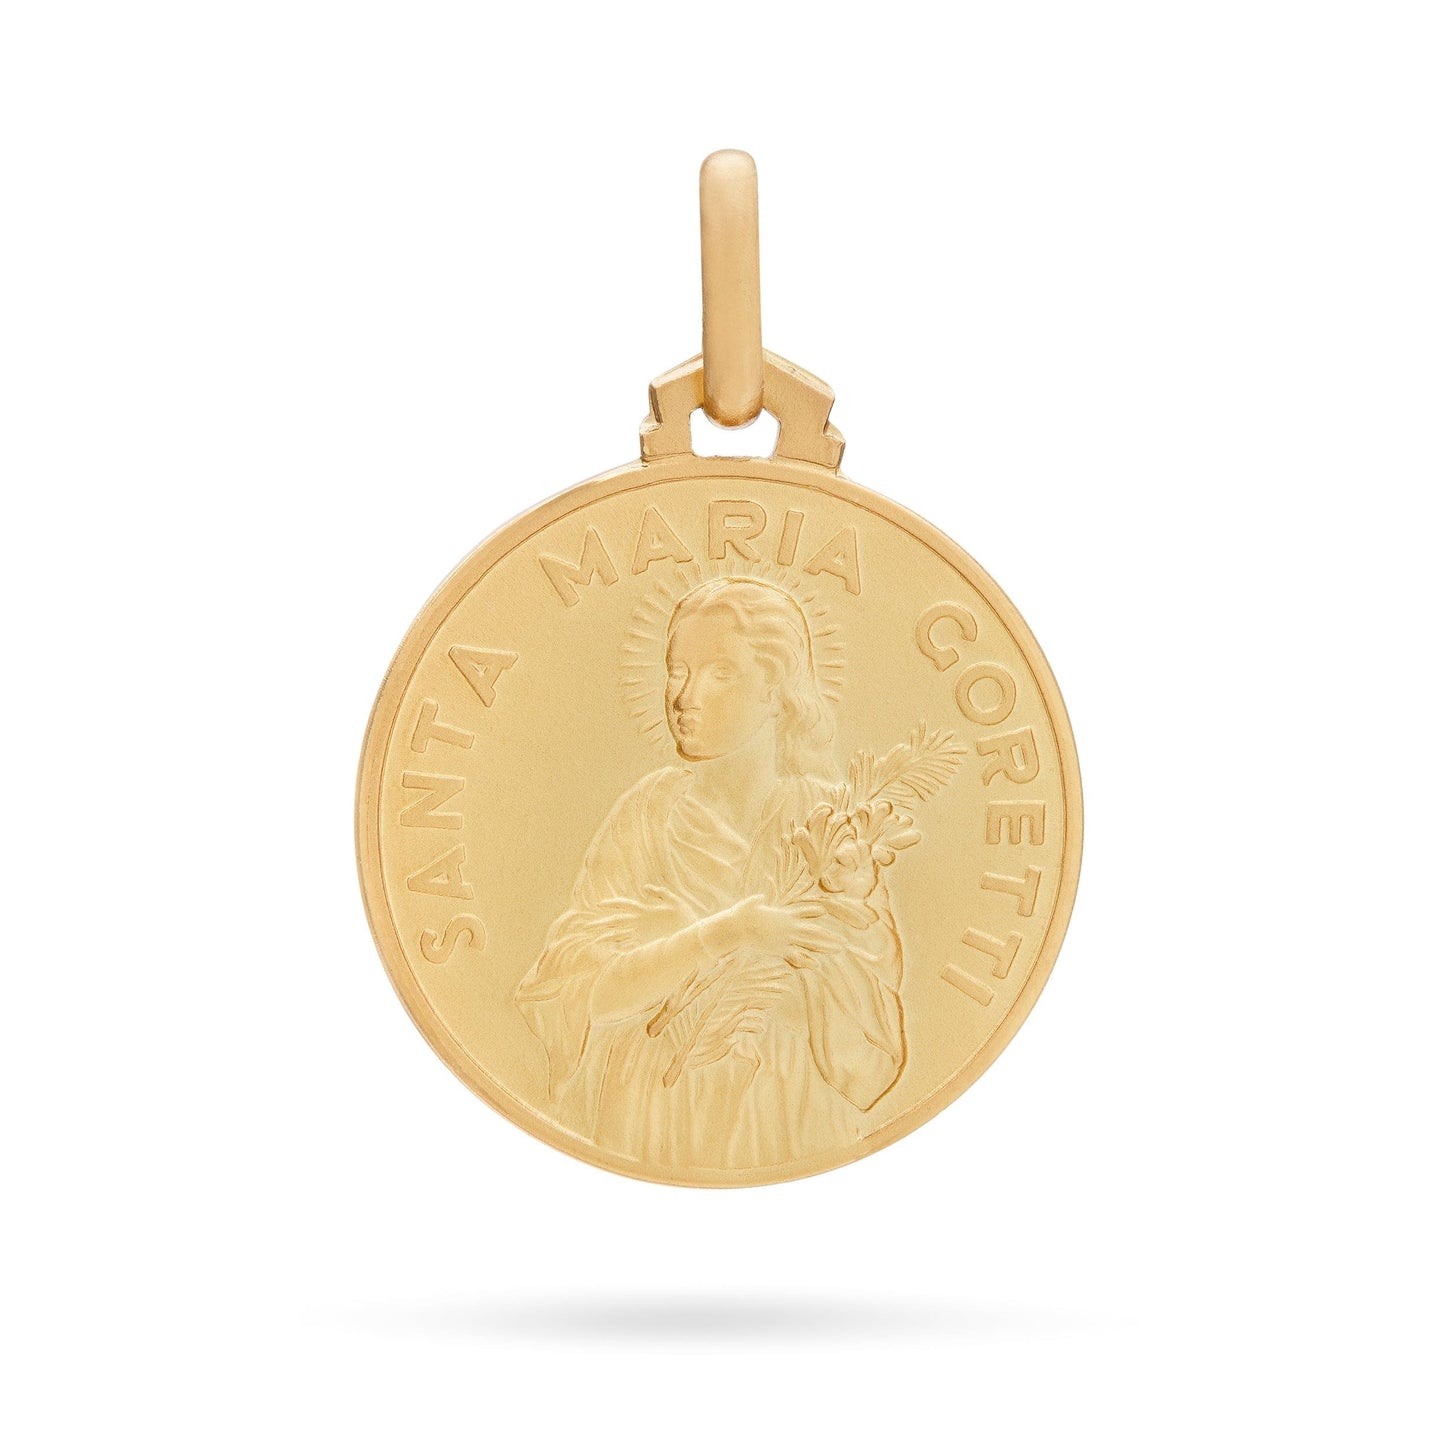 MONDO CATTOLICO 18 mm (0.70 in) Gold medal of Saint Mary Goretti